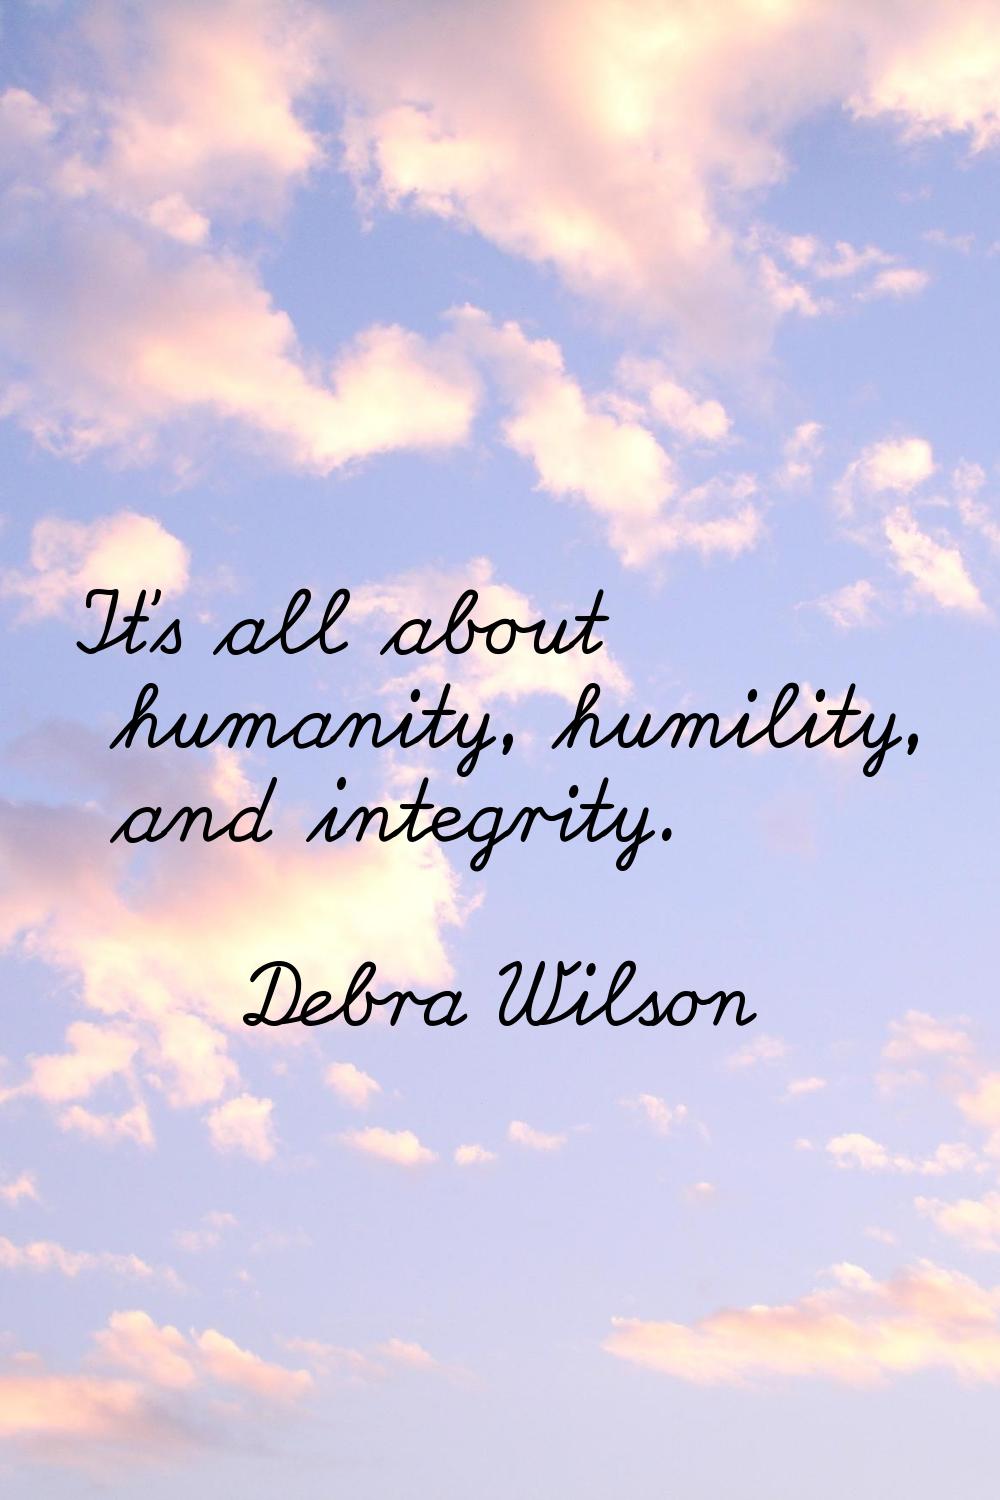 It's all about humanity, humility, and integrity.